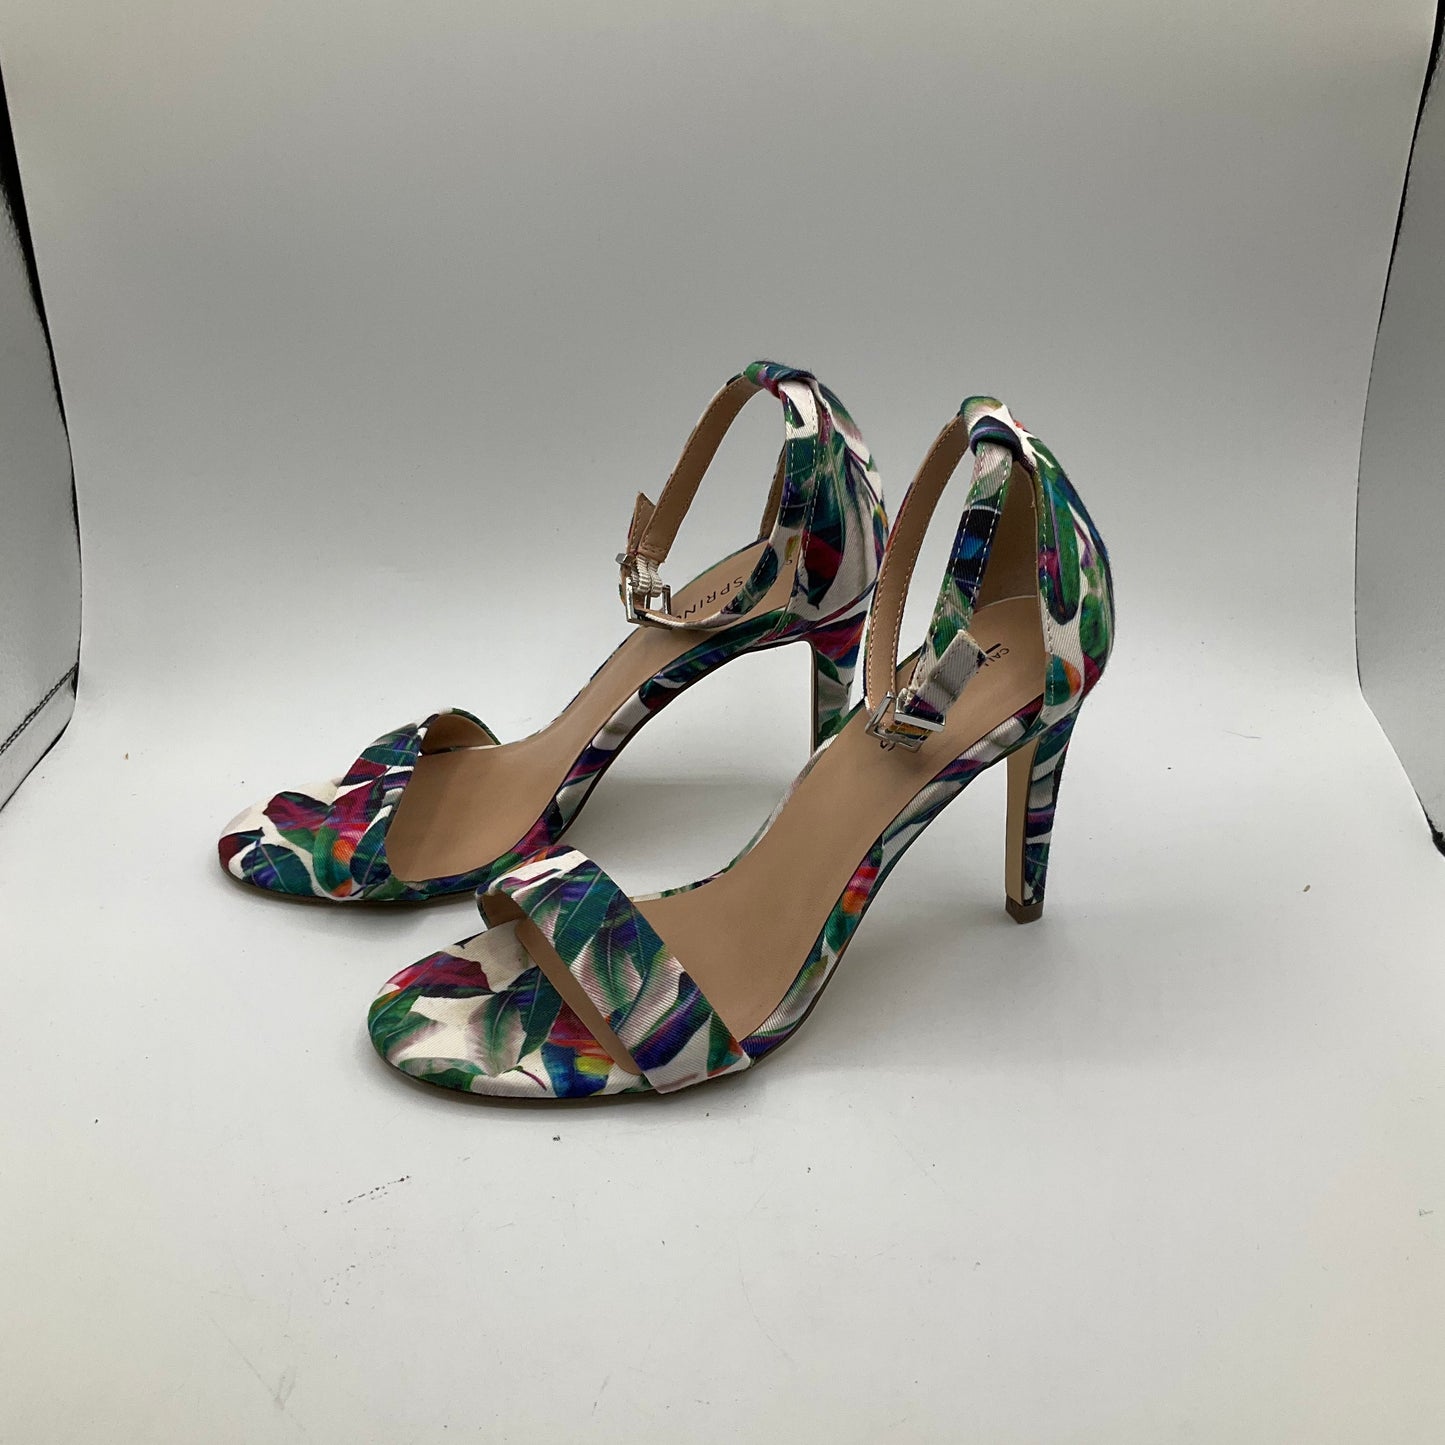 Shoes Heels Stiletto By Call It Spring  Size: 7.5